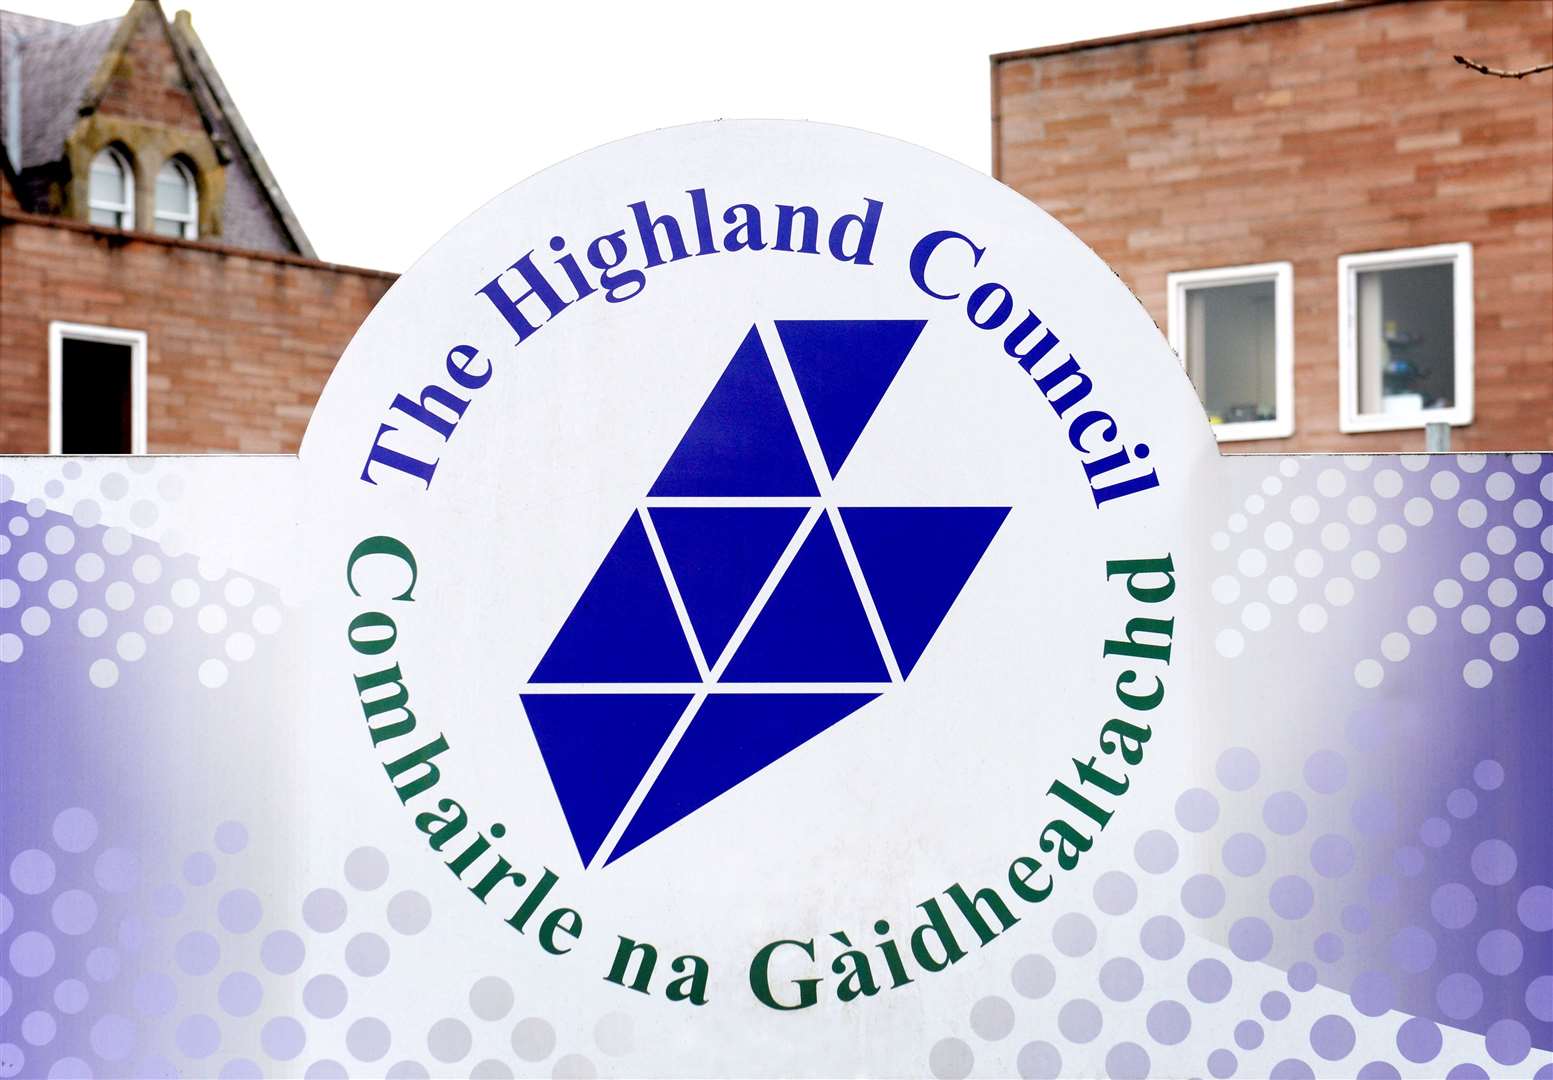 Highland Council Trading Standards are warning about scams linked to the coronavirus.